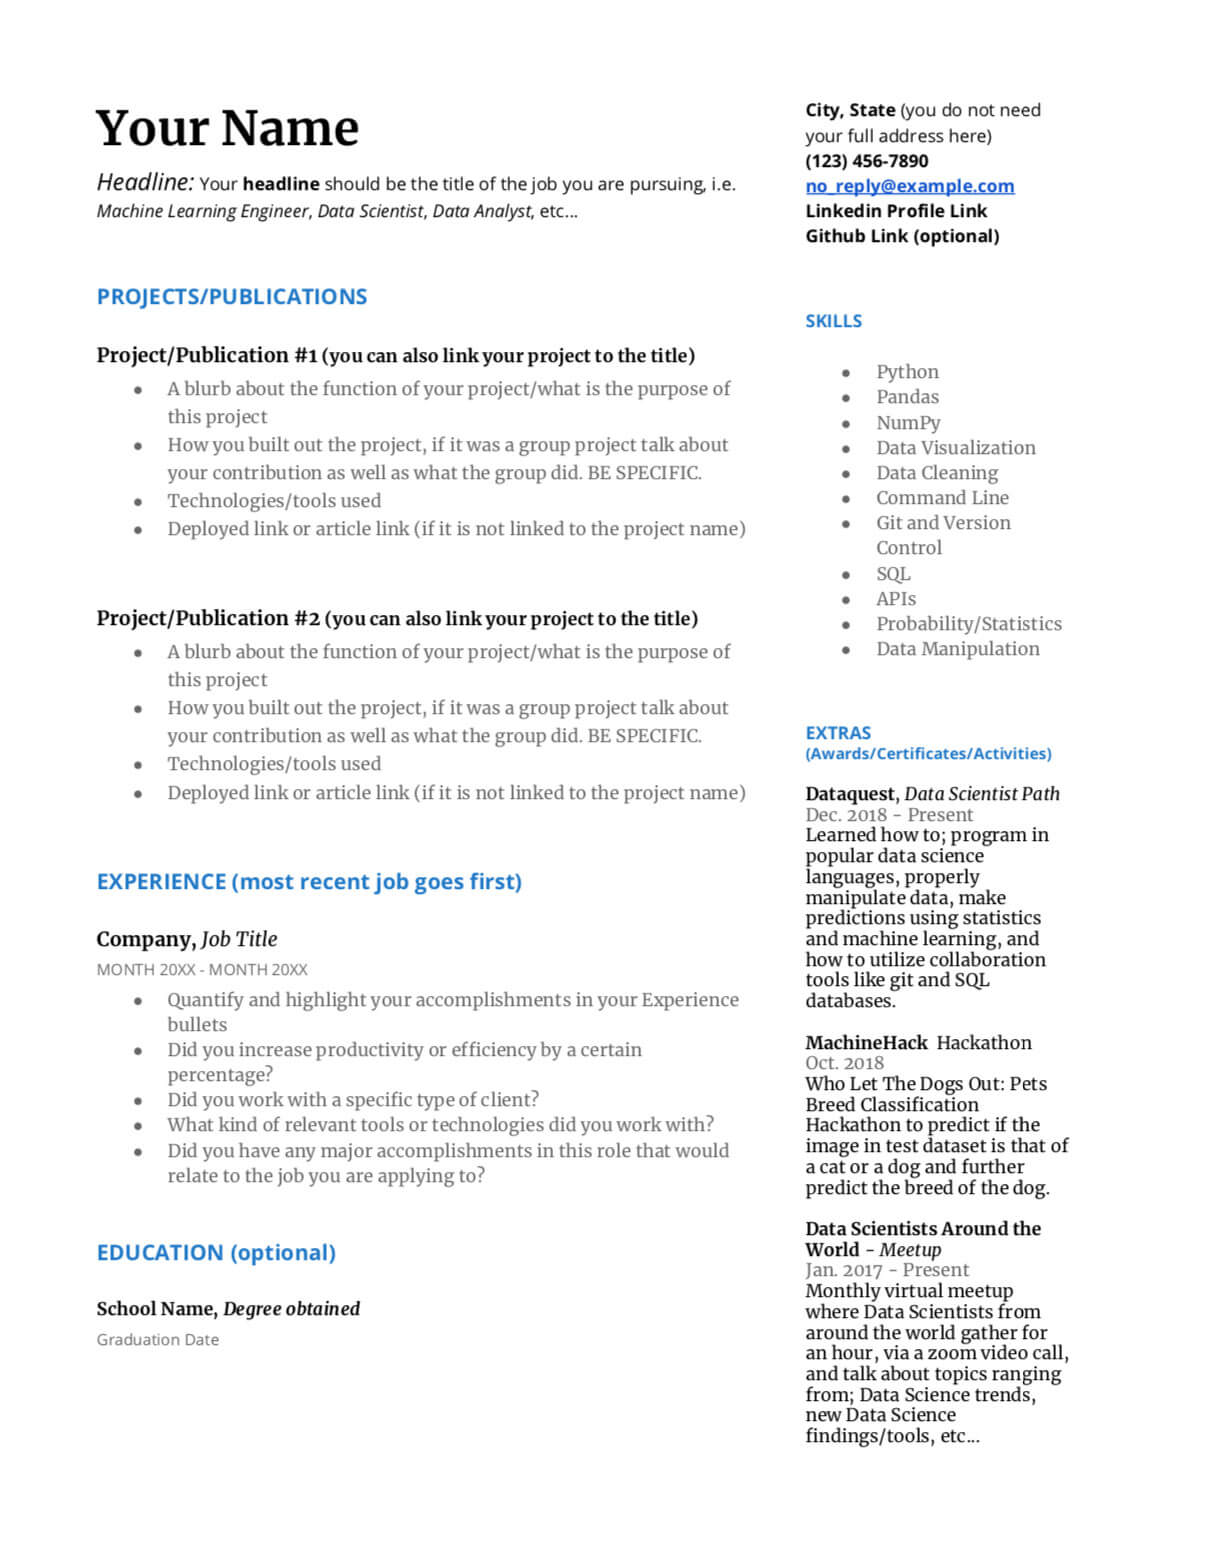 How To Type A Resume Data Science Resume Template 1 how to type a resume|wikiresume.com